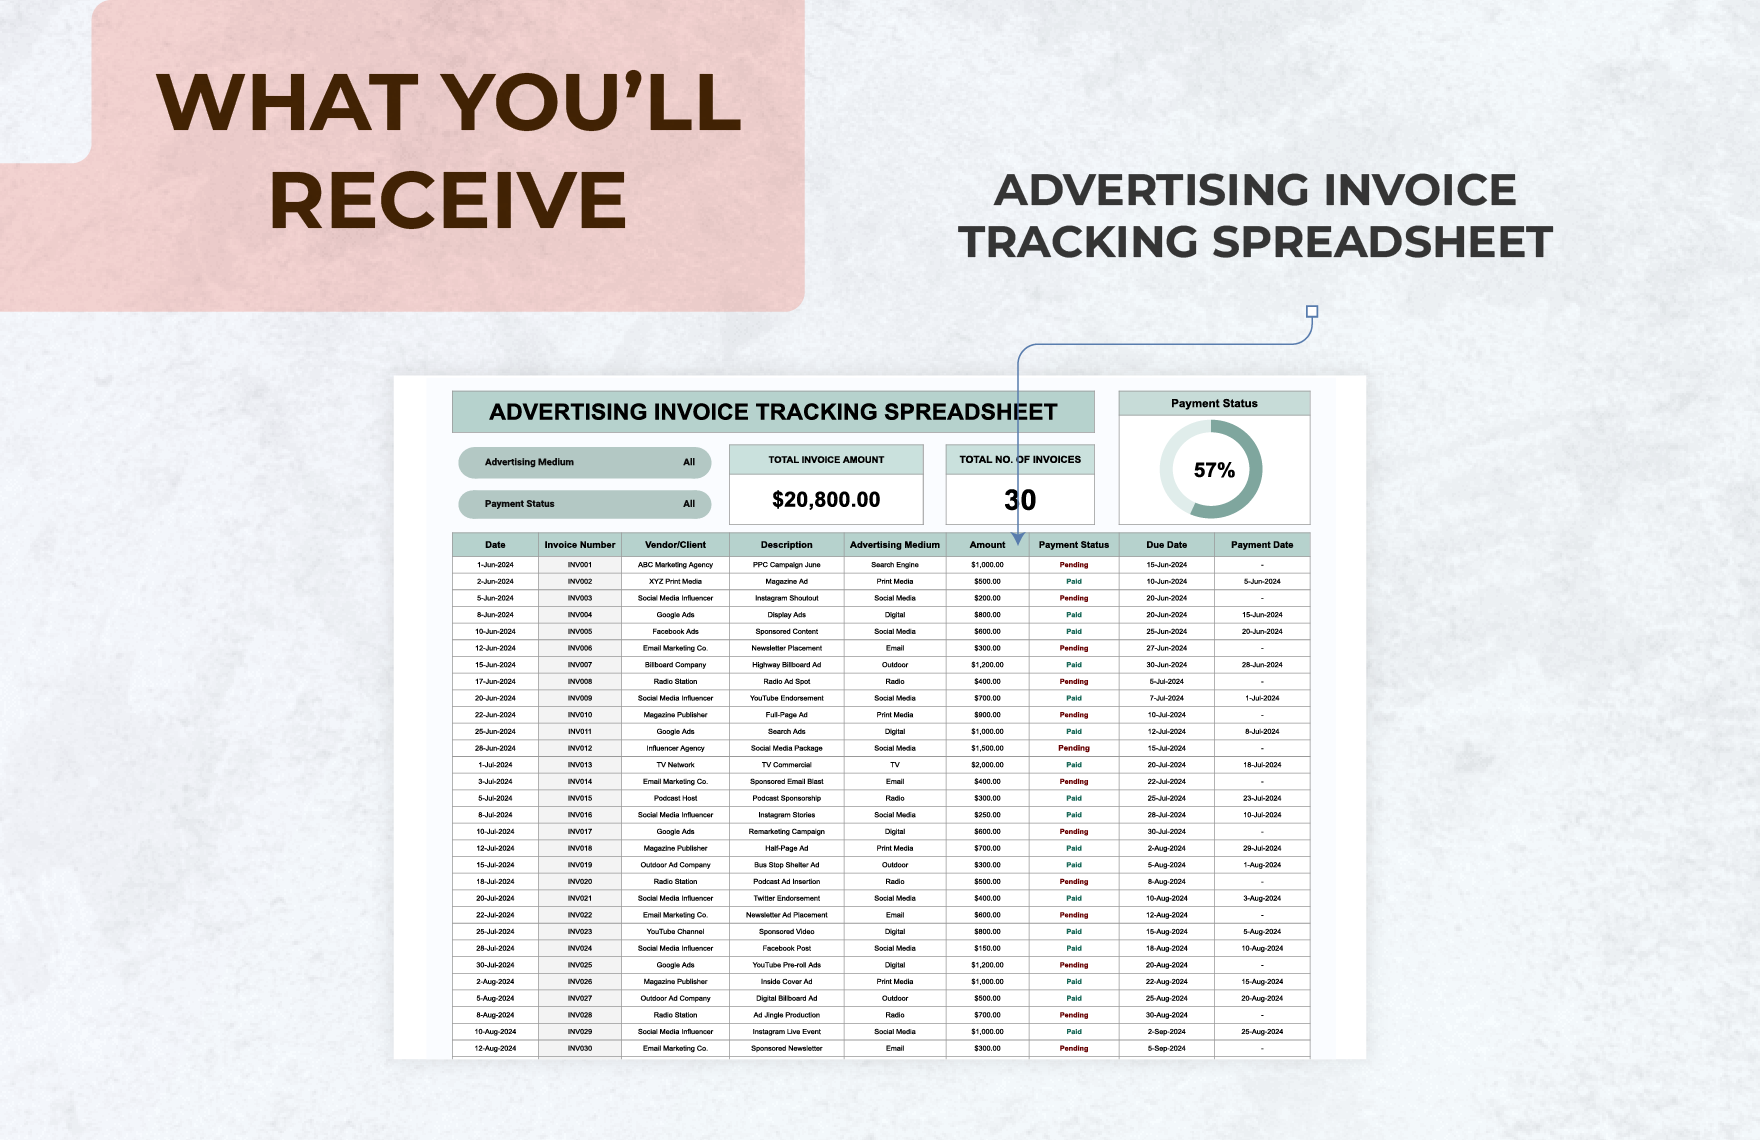 Advertising Invoice Tracking Spreadsheet Template